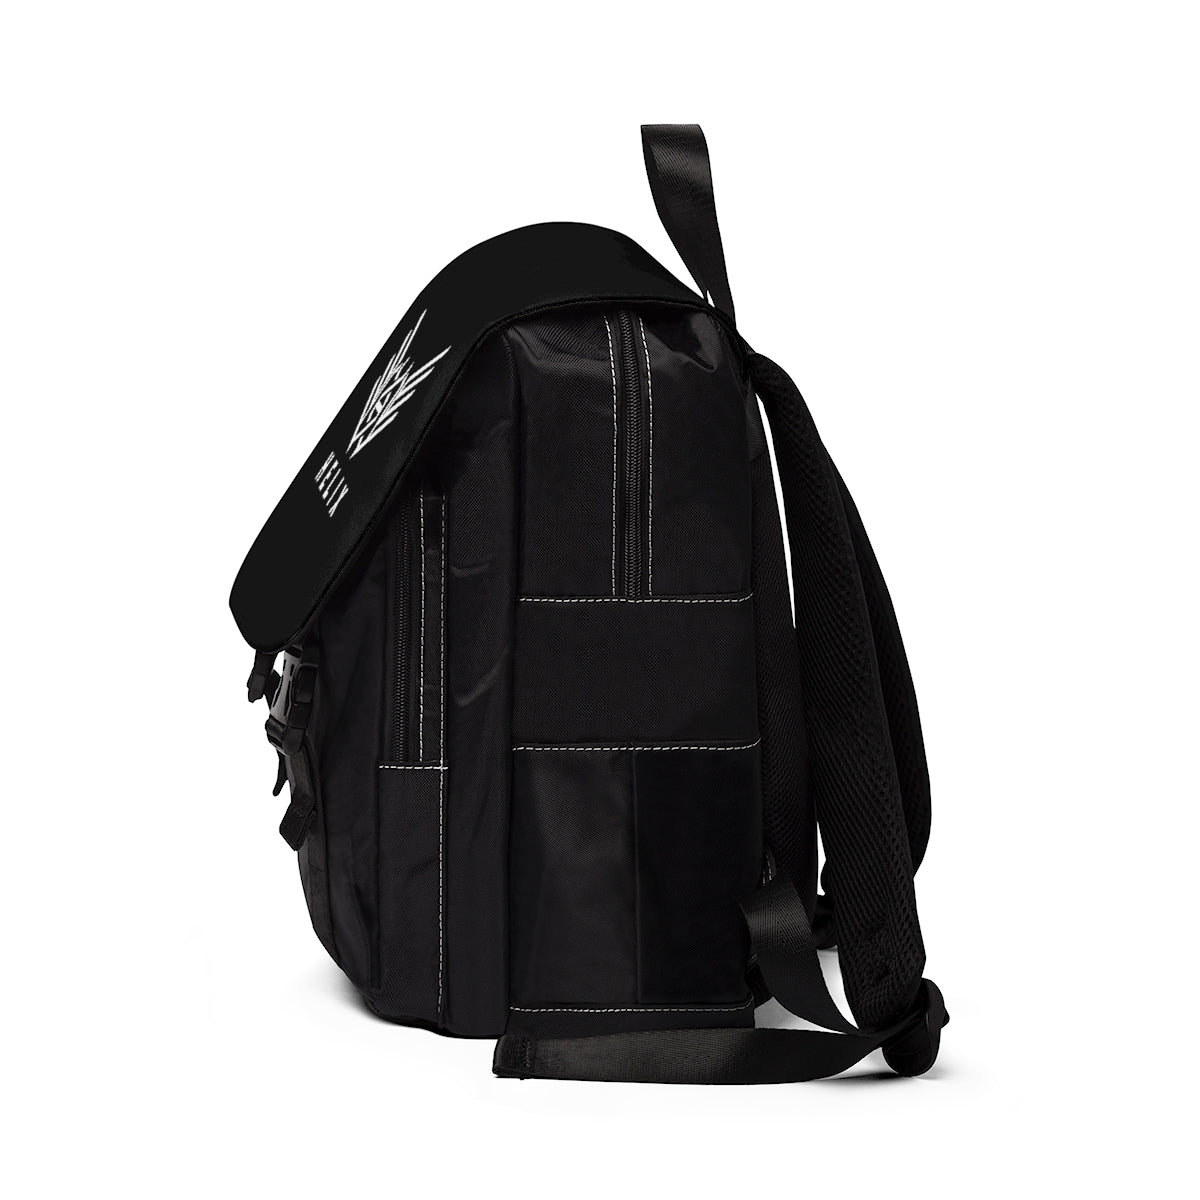 Age Of The Auto Games: Helix Backpack